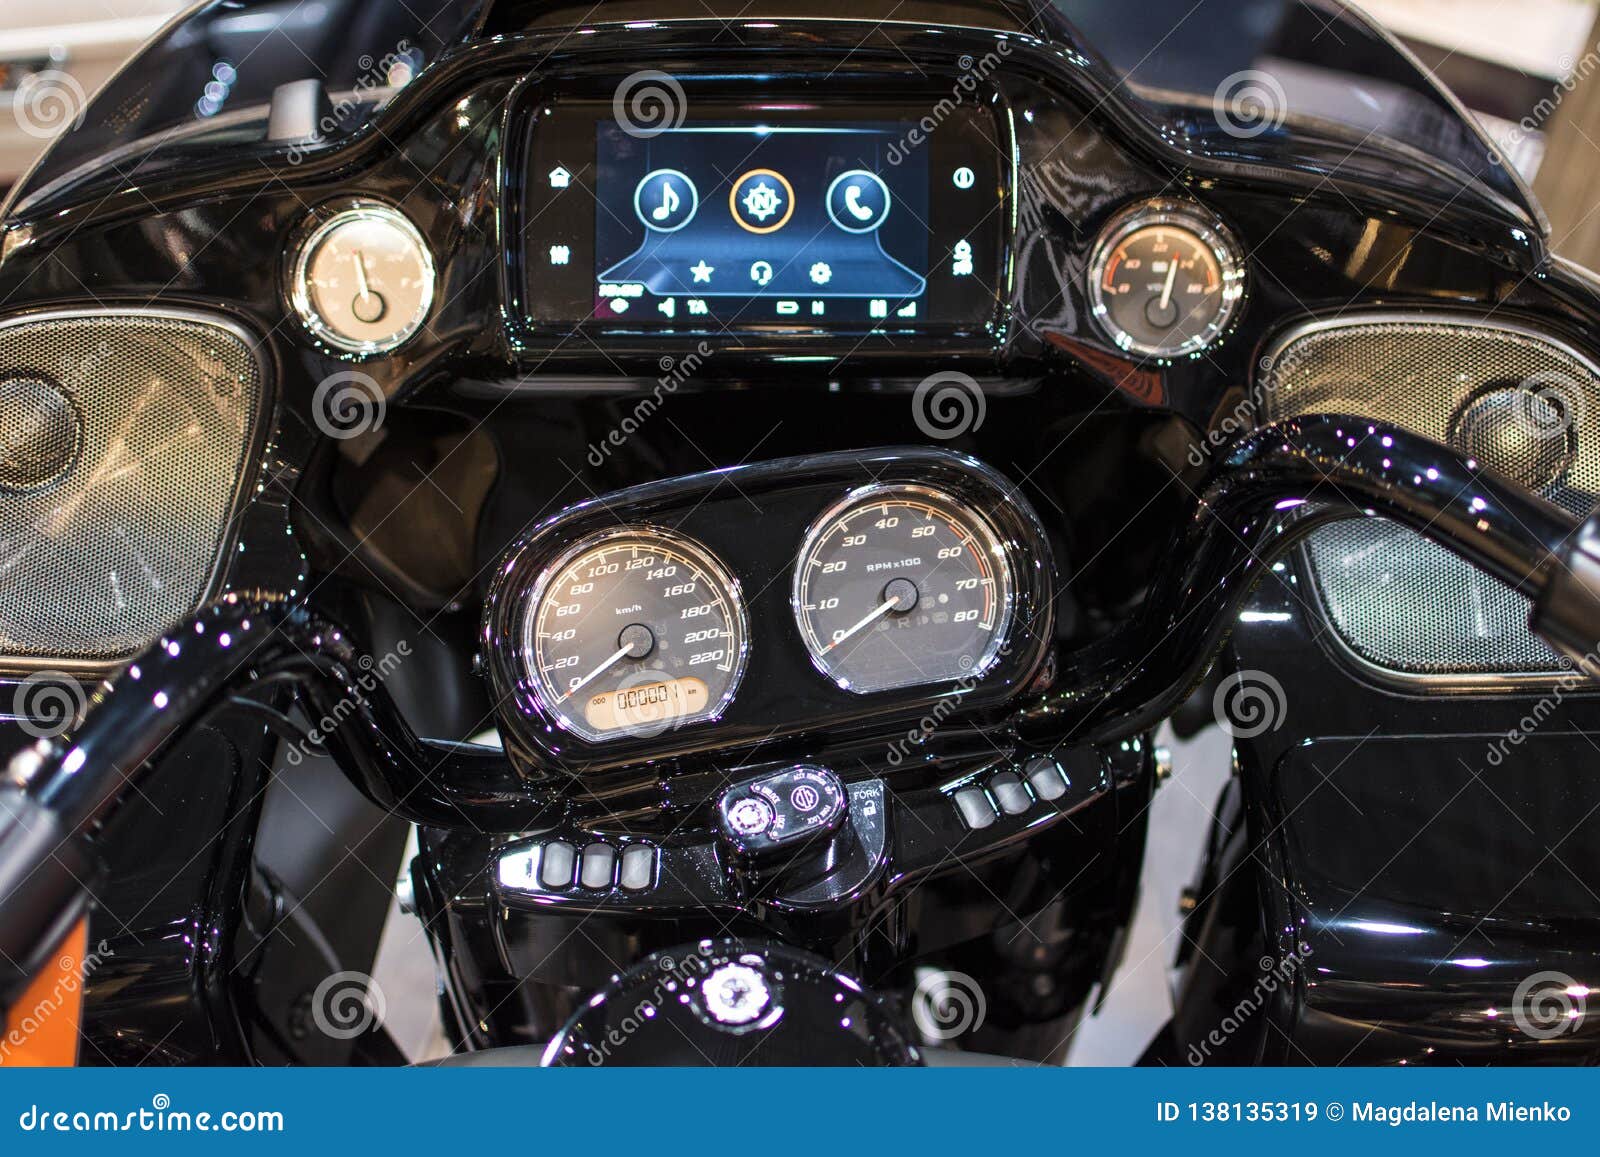 The Steering Wheel Of The Modern Cvo Harley Davidson Motorcycle Editorial Stock Image Image Of Detail World 138135319